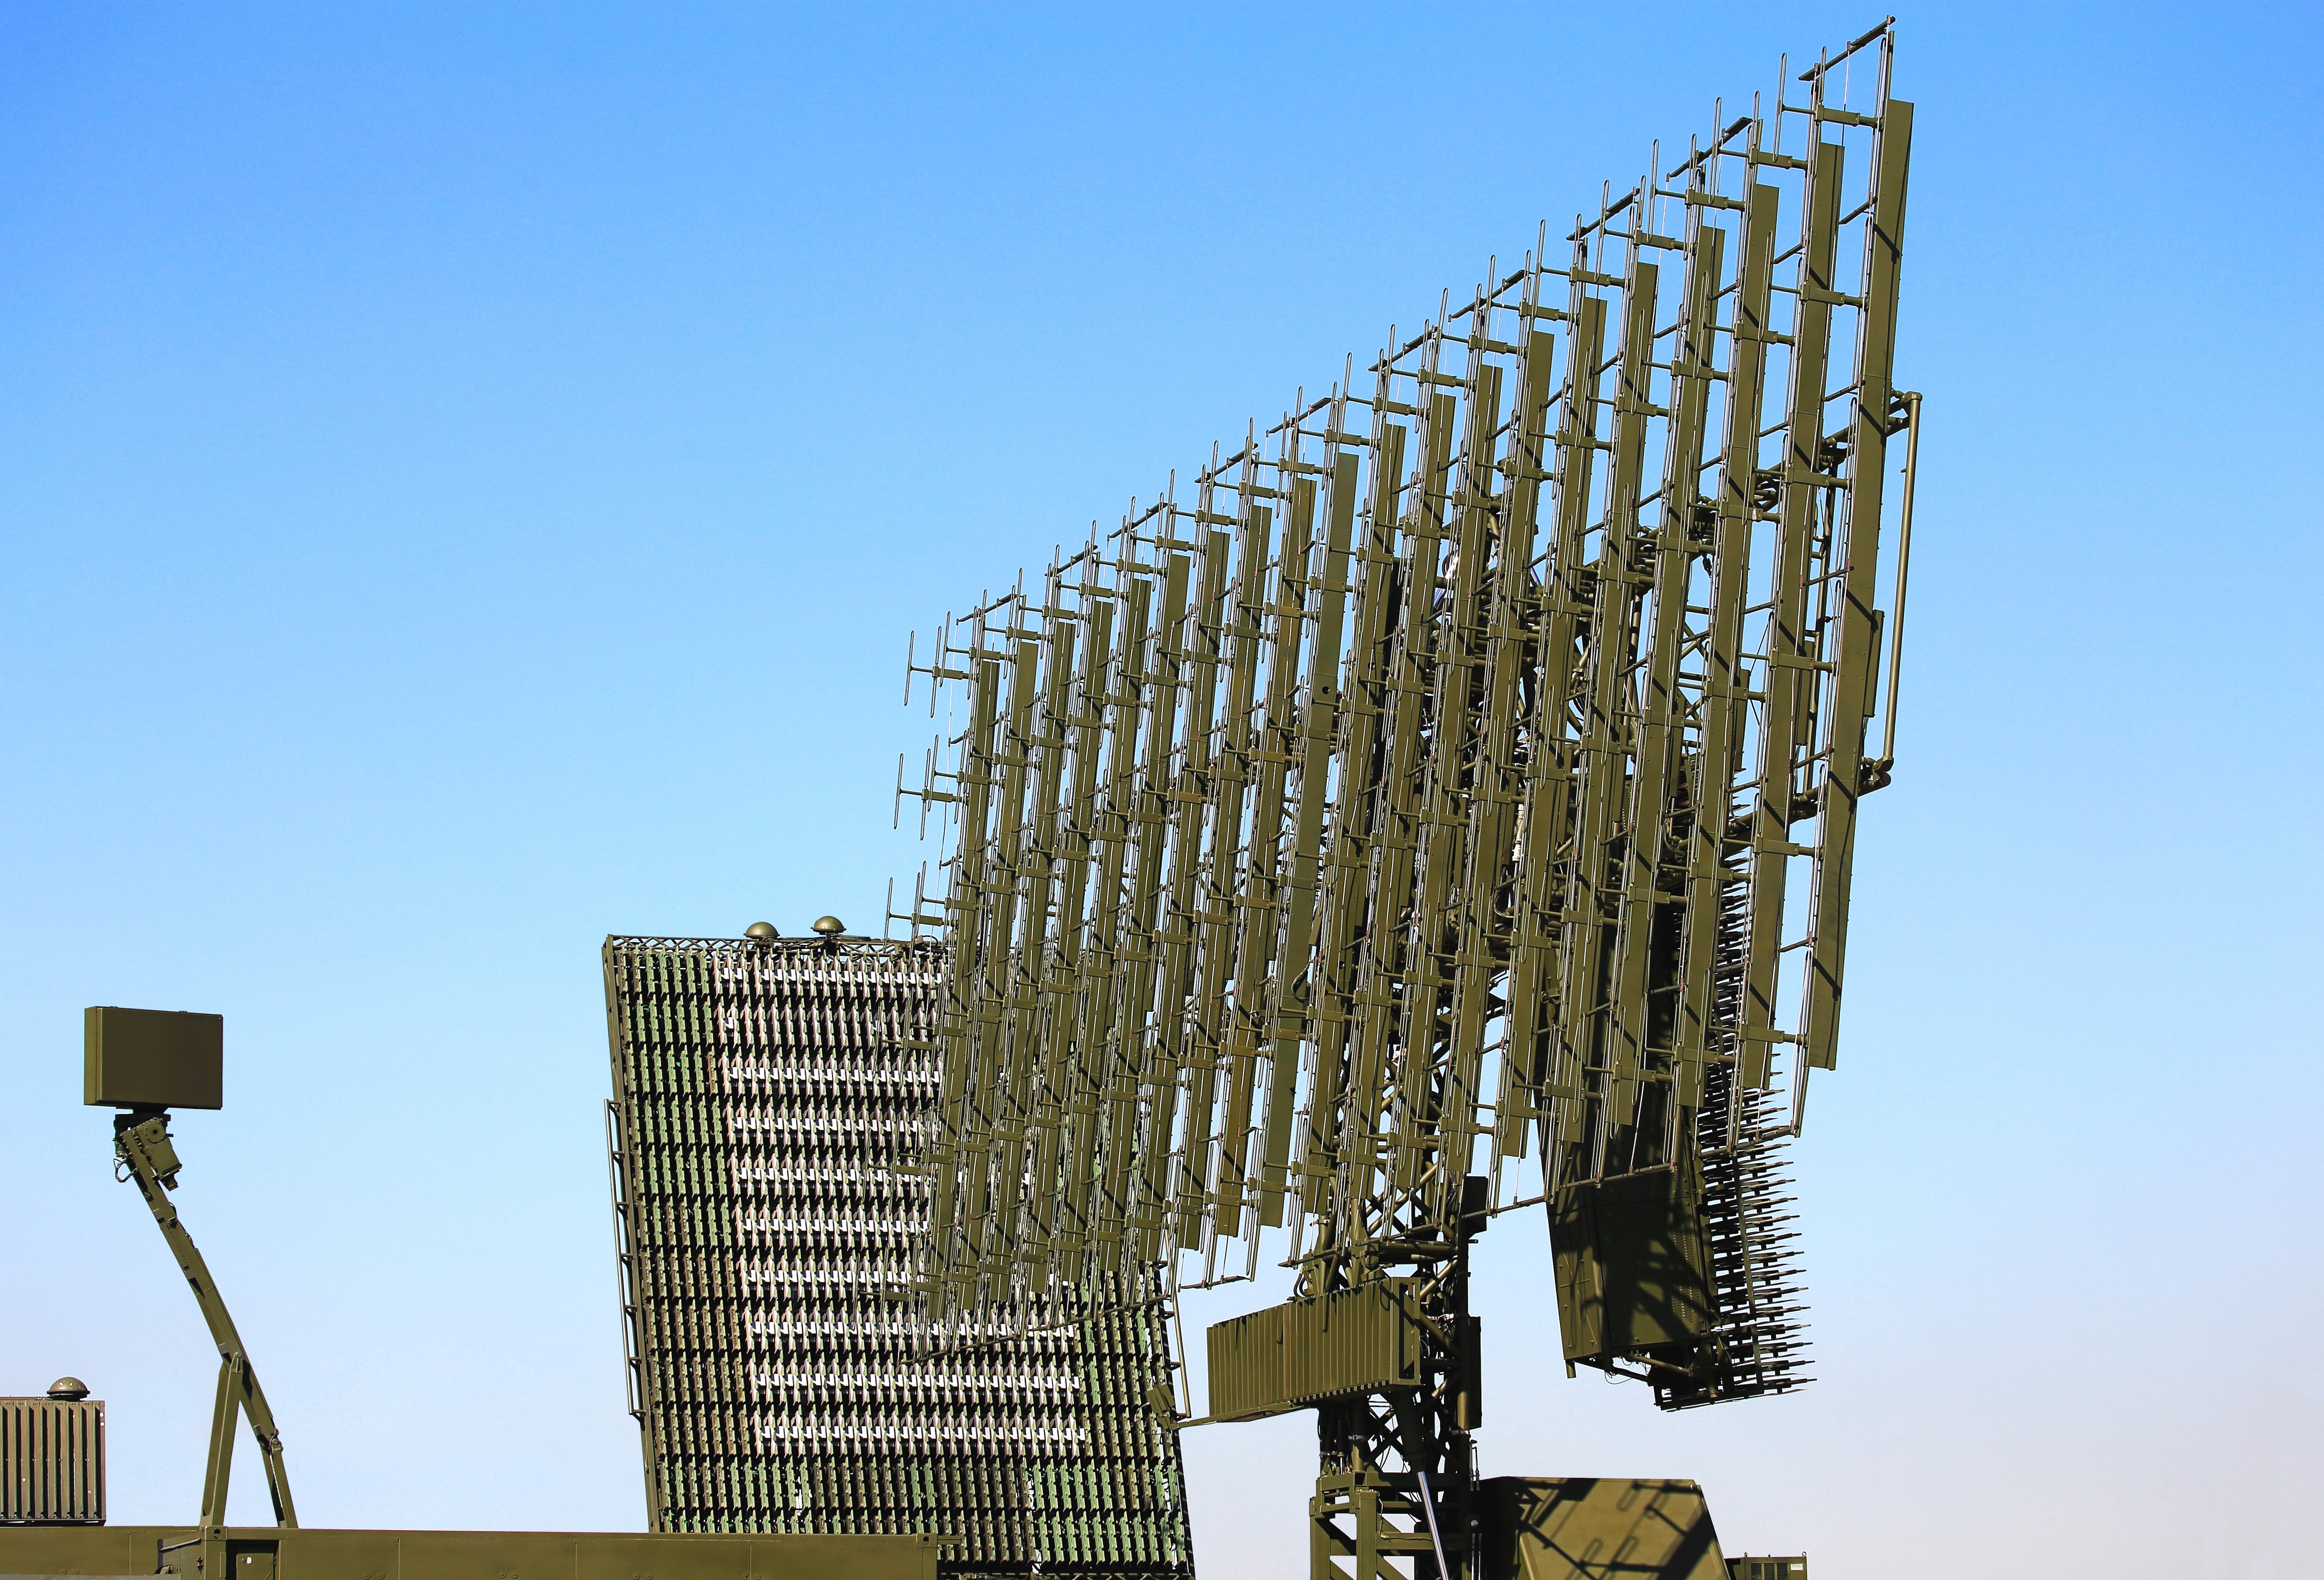 Two phased array antennas against a blue-sky background